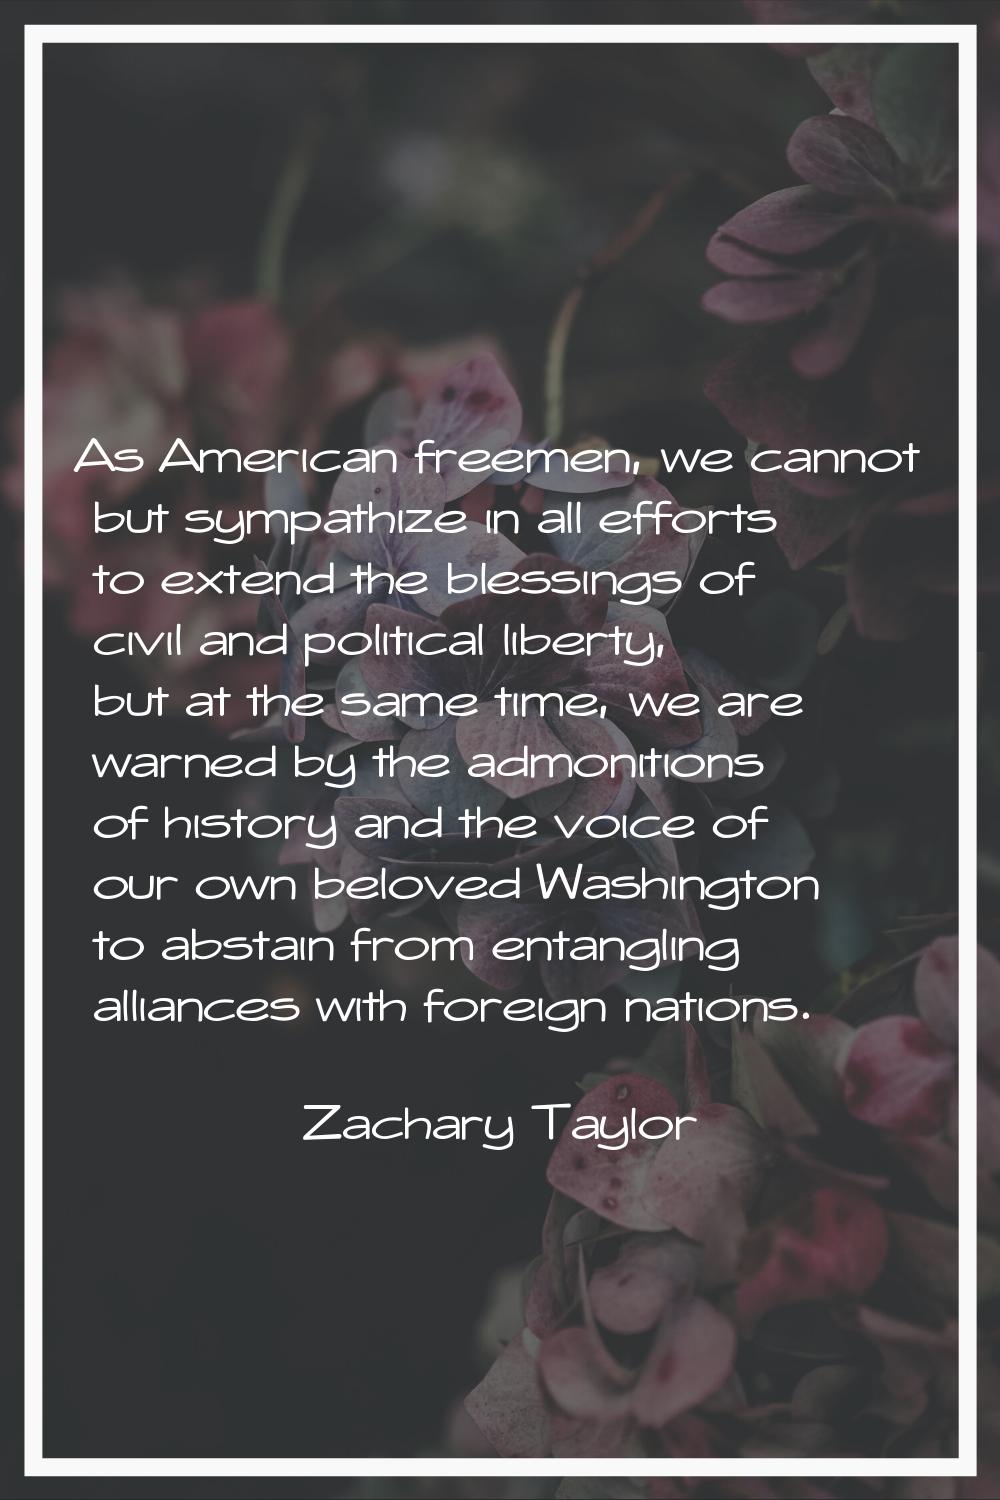 As American freemen, we cannot but sympathize in all efforts to extend the blessings of civil and p